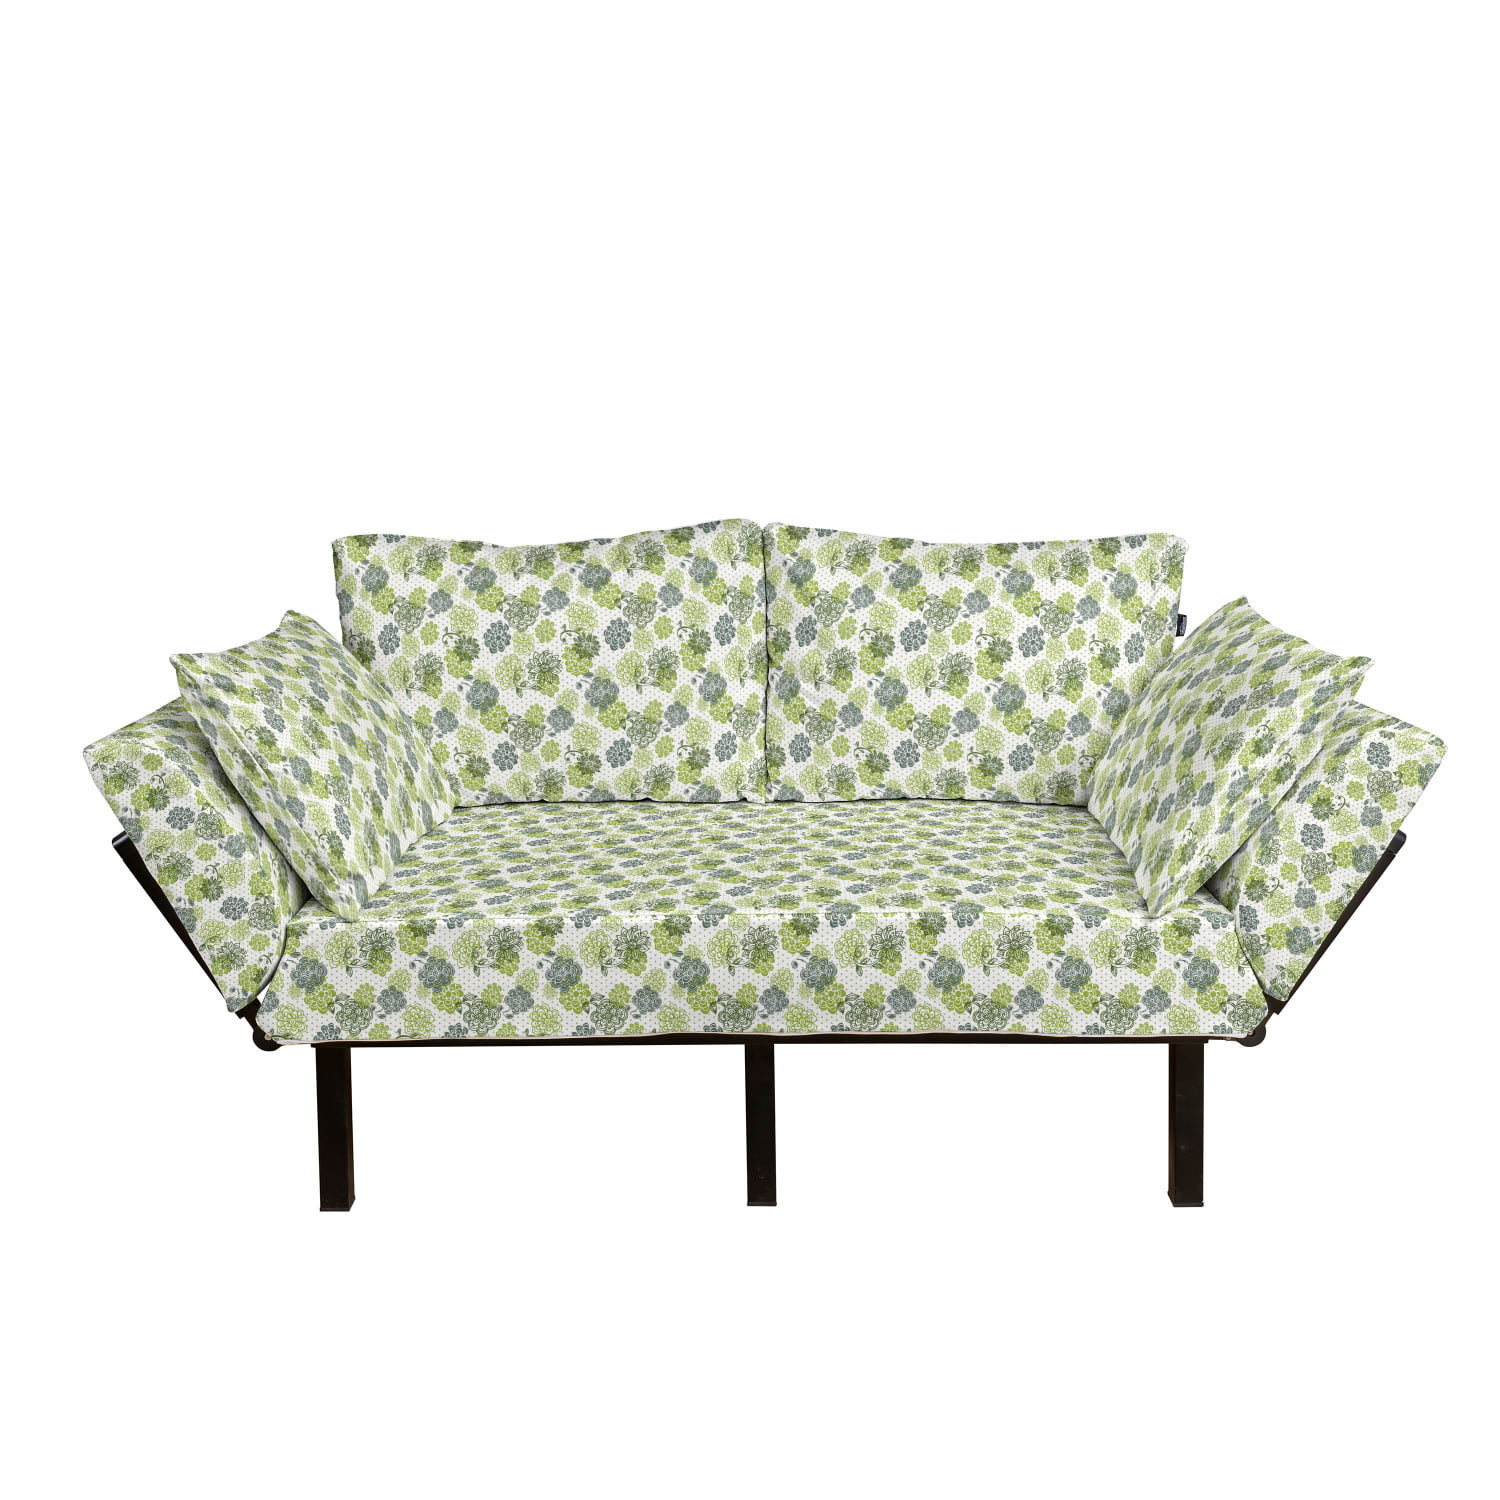 Daybed with Metal Frame Upholstered Sofa for Living Dorm Illustrated Green Camouflage in Forest Colors Hunter Theme Dark Green Army Green Ambesonne Camo Futon Couch Loveseat